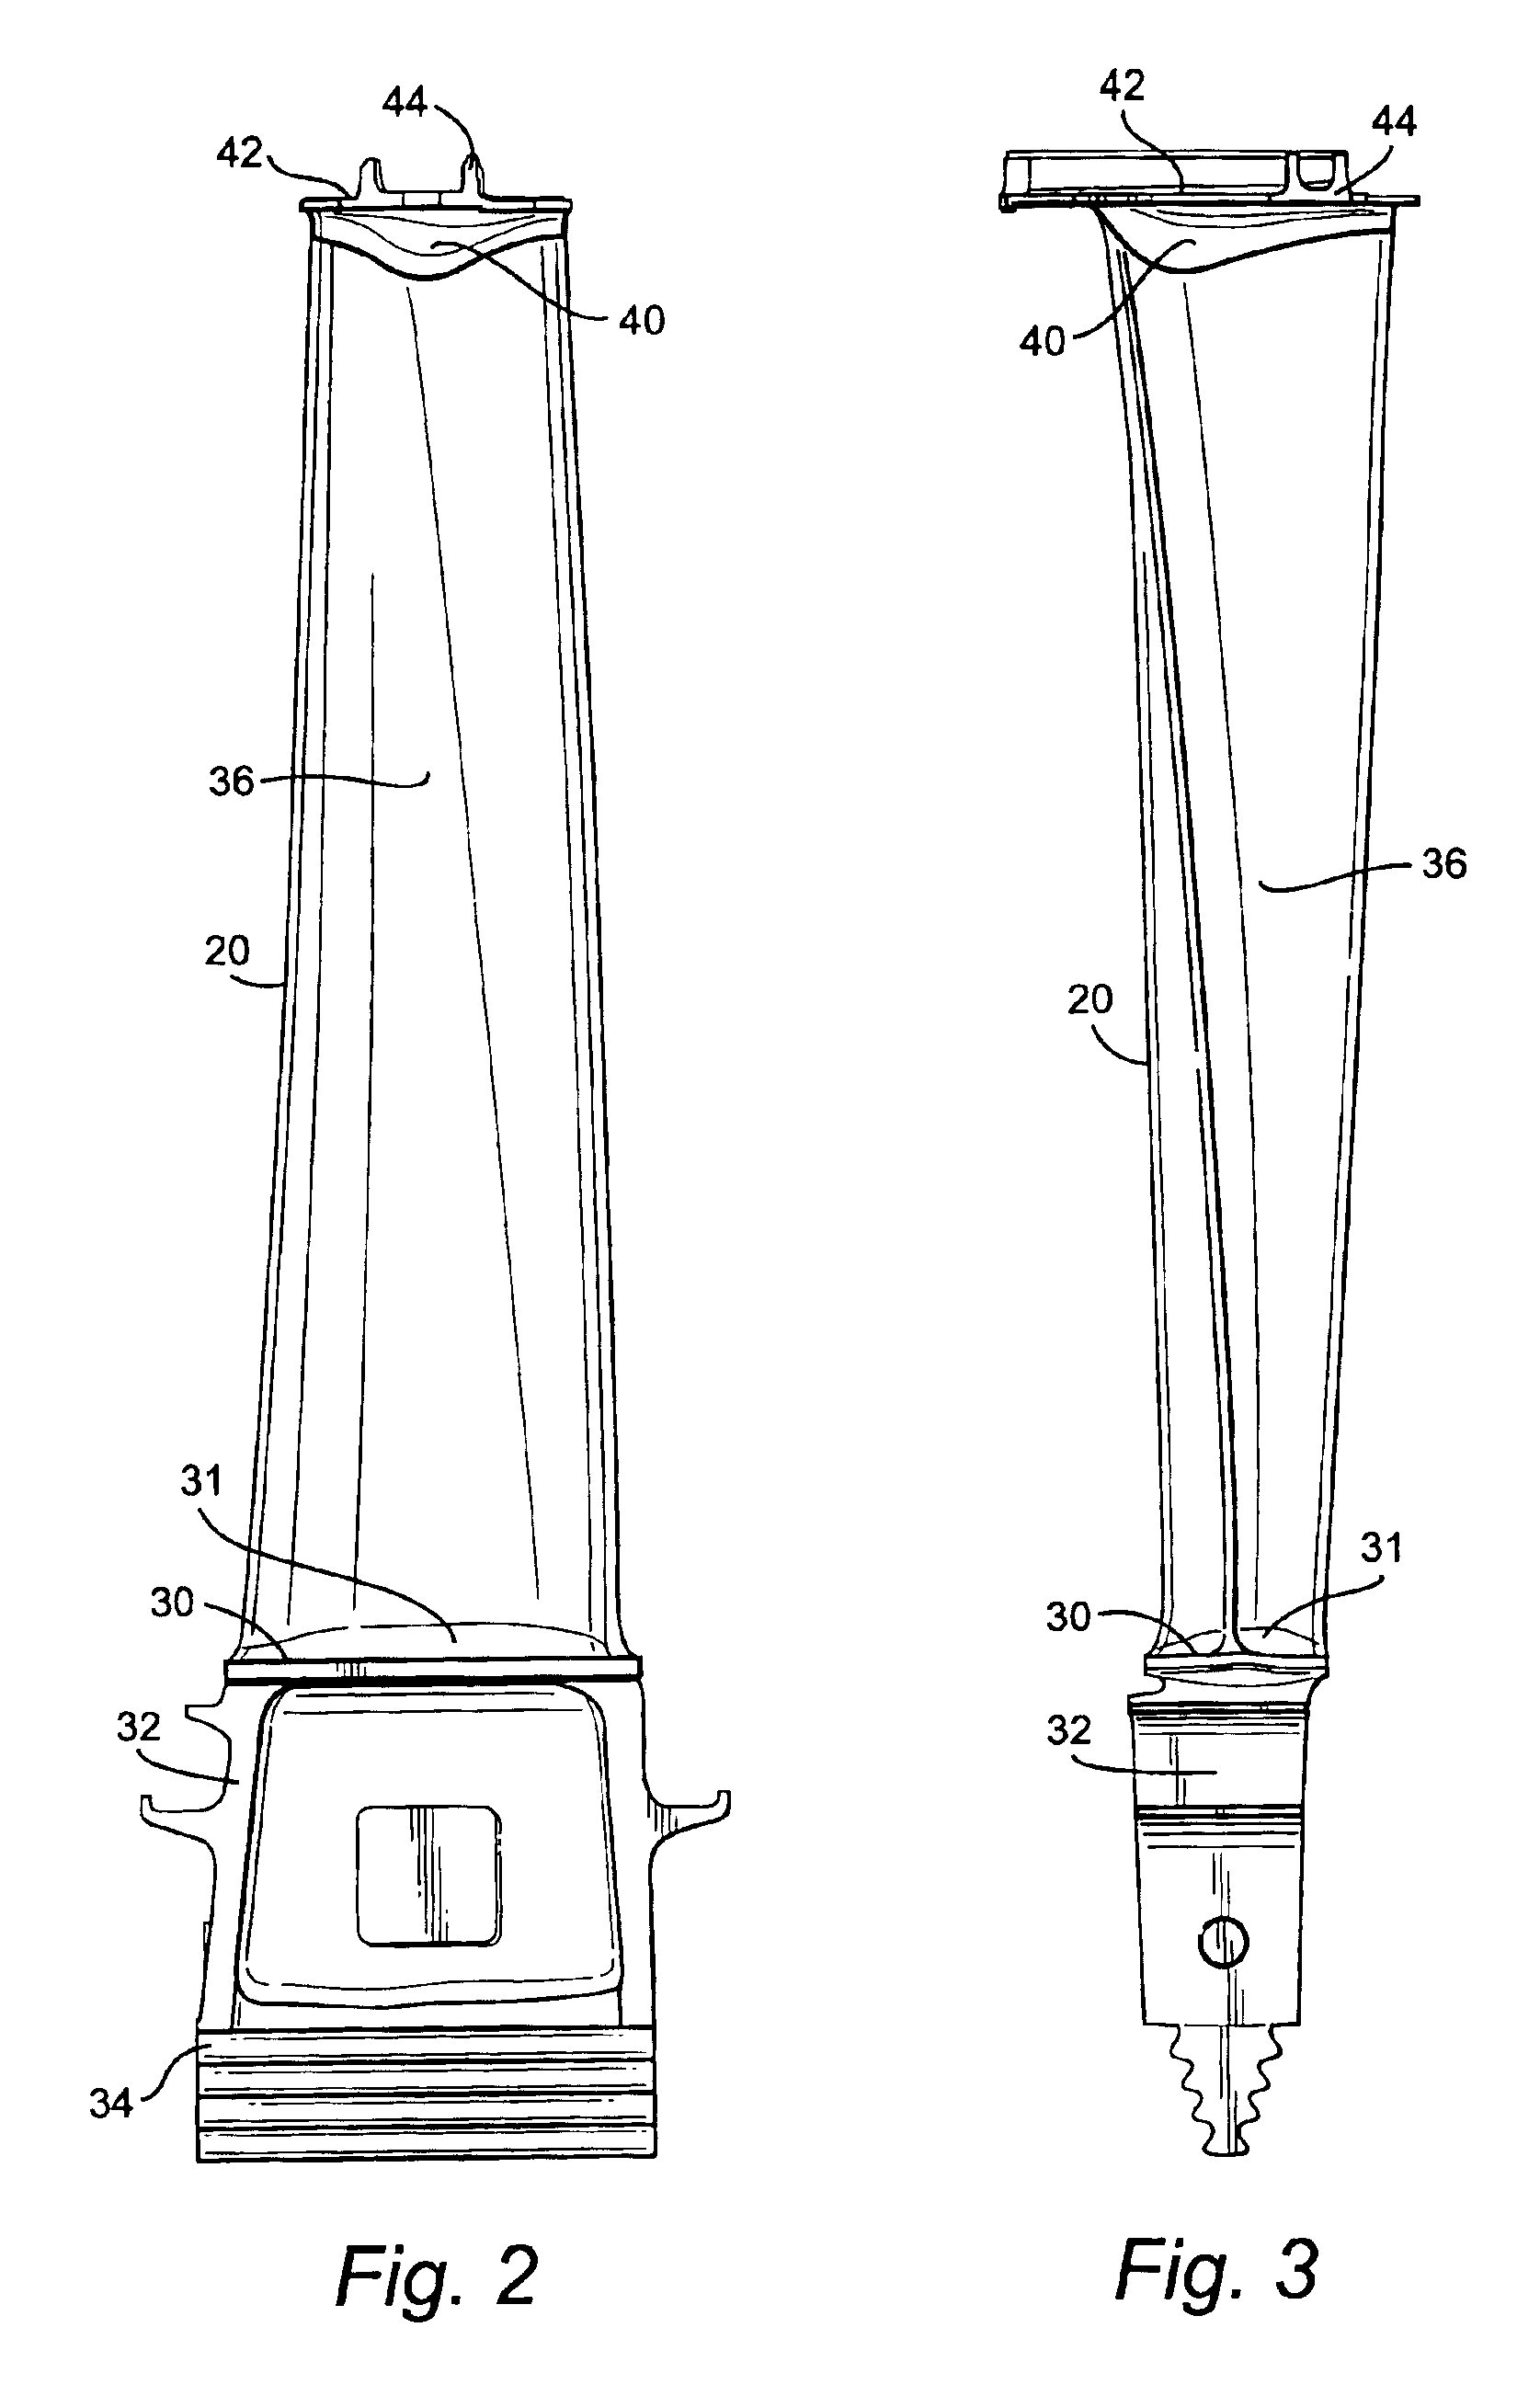 Conical tip shroud fillet for a turbine bucket